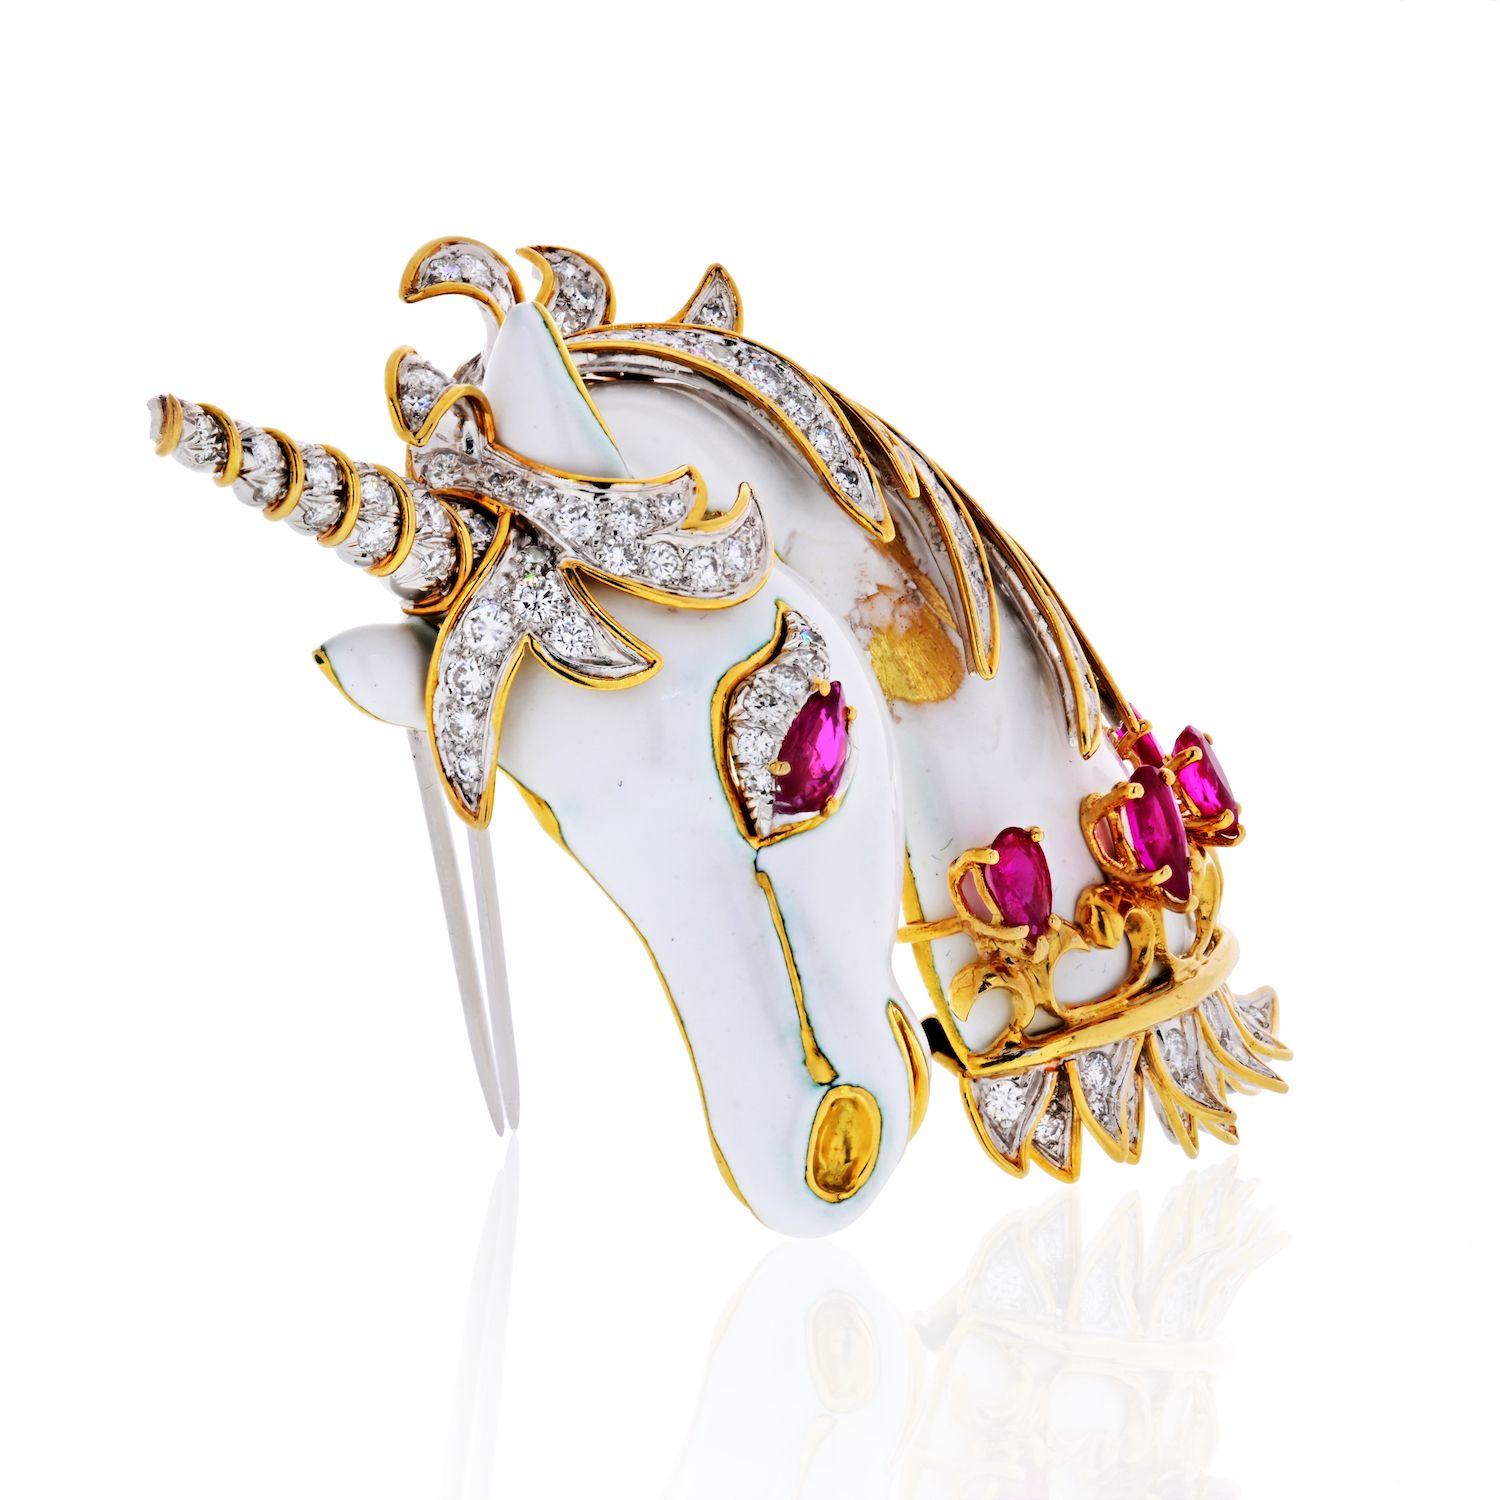 Designed as a unicorn, the eye and collar set with pear-shaped rubies, highlighted with round and single-cut diamonds, and applied with white enamel, signed Webb. The rubies are medium to medium deep purplish red. The diamonds, estimated to weigh a